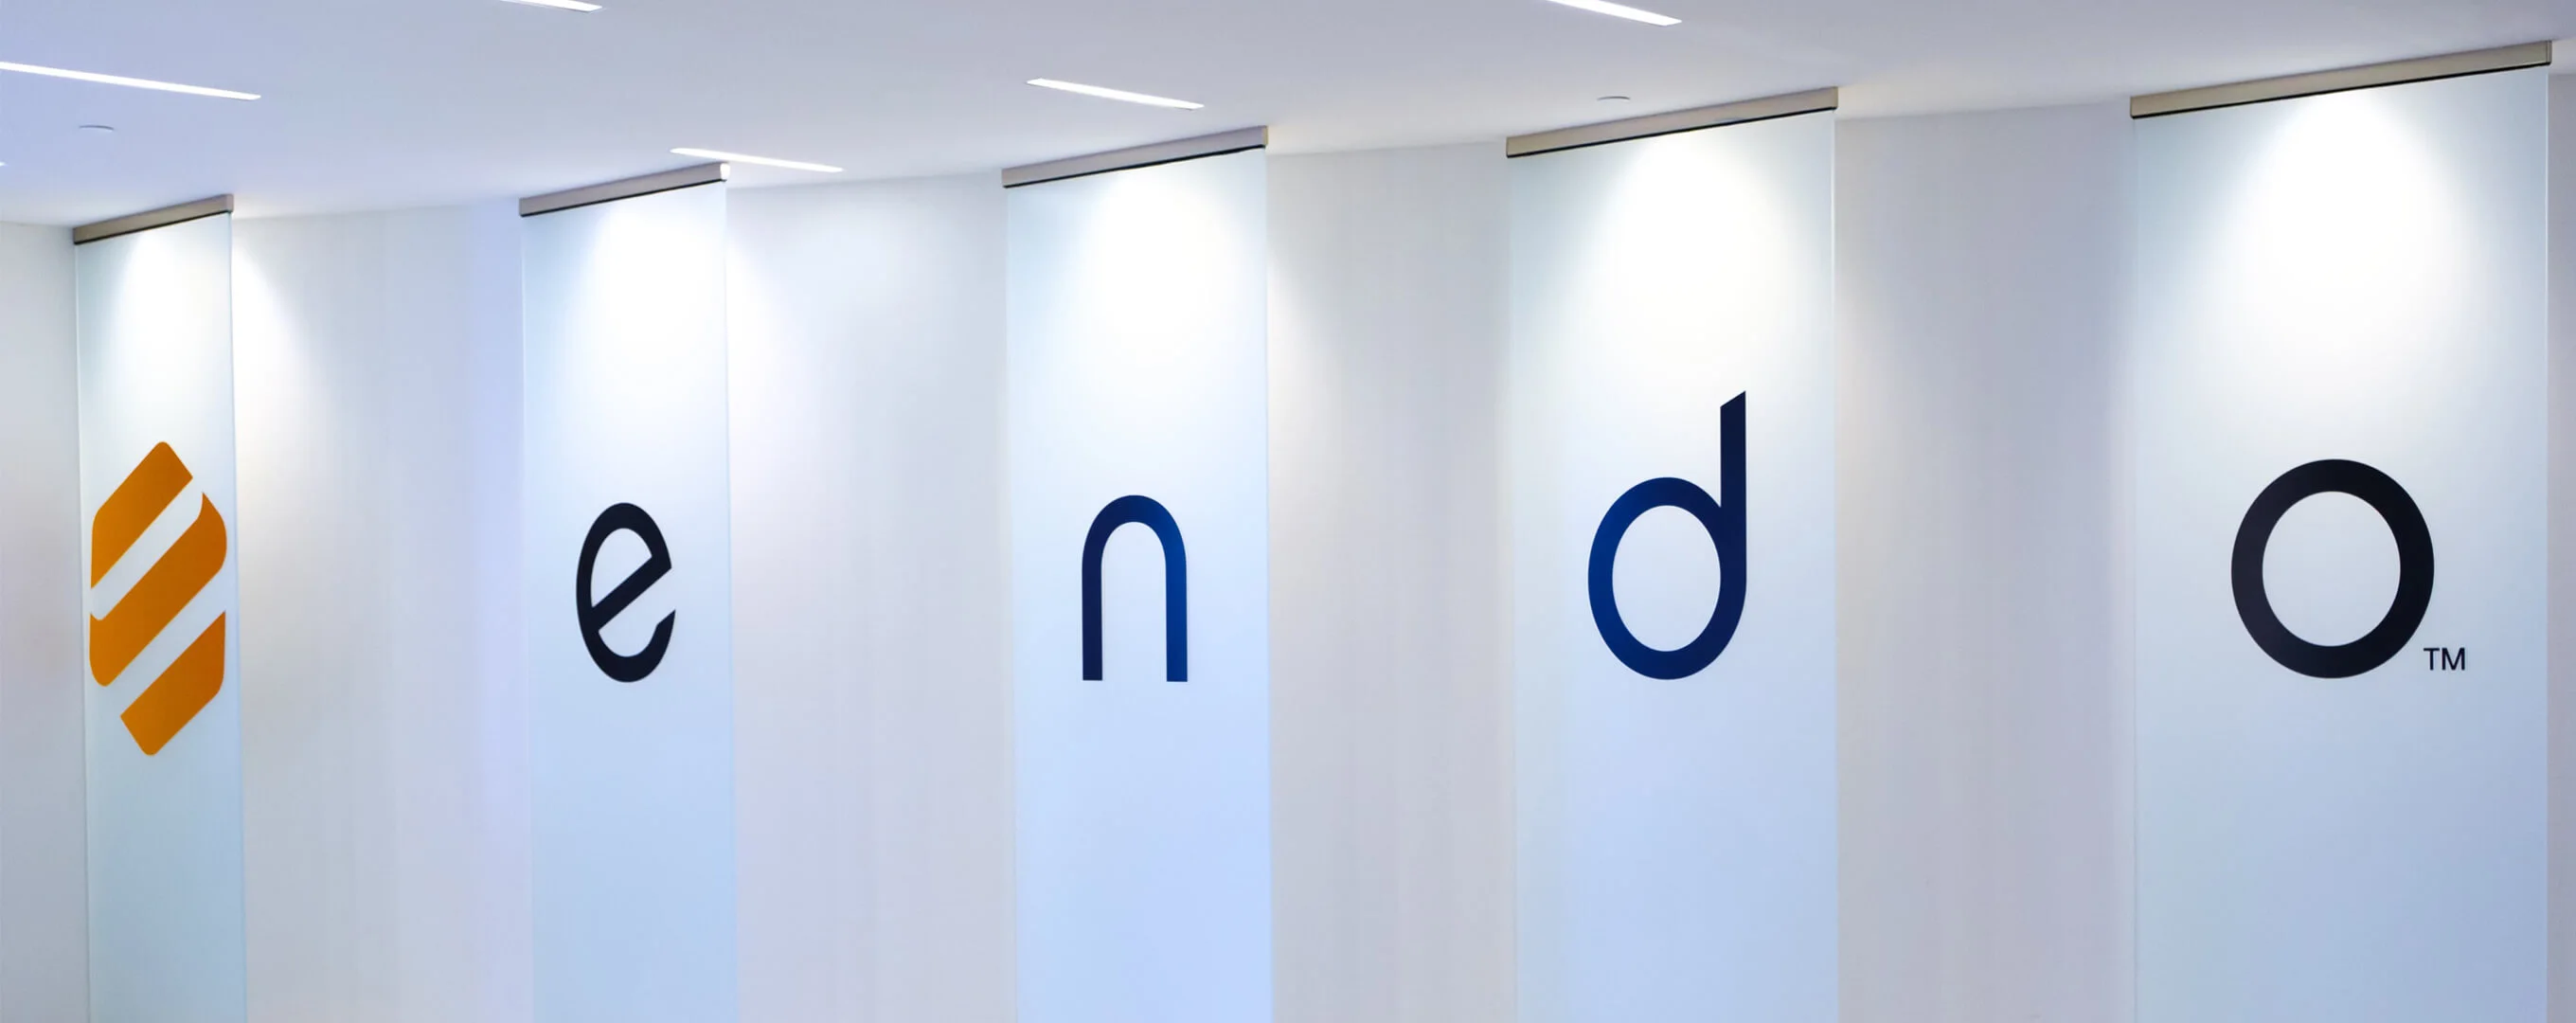 The Endo logo on the side of an office wall.